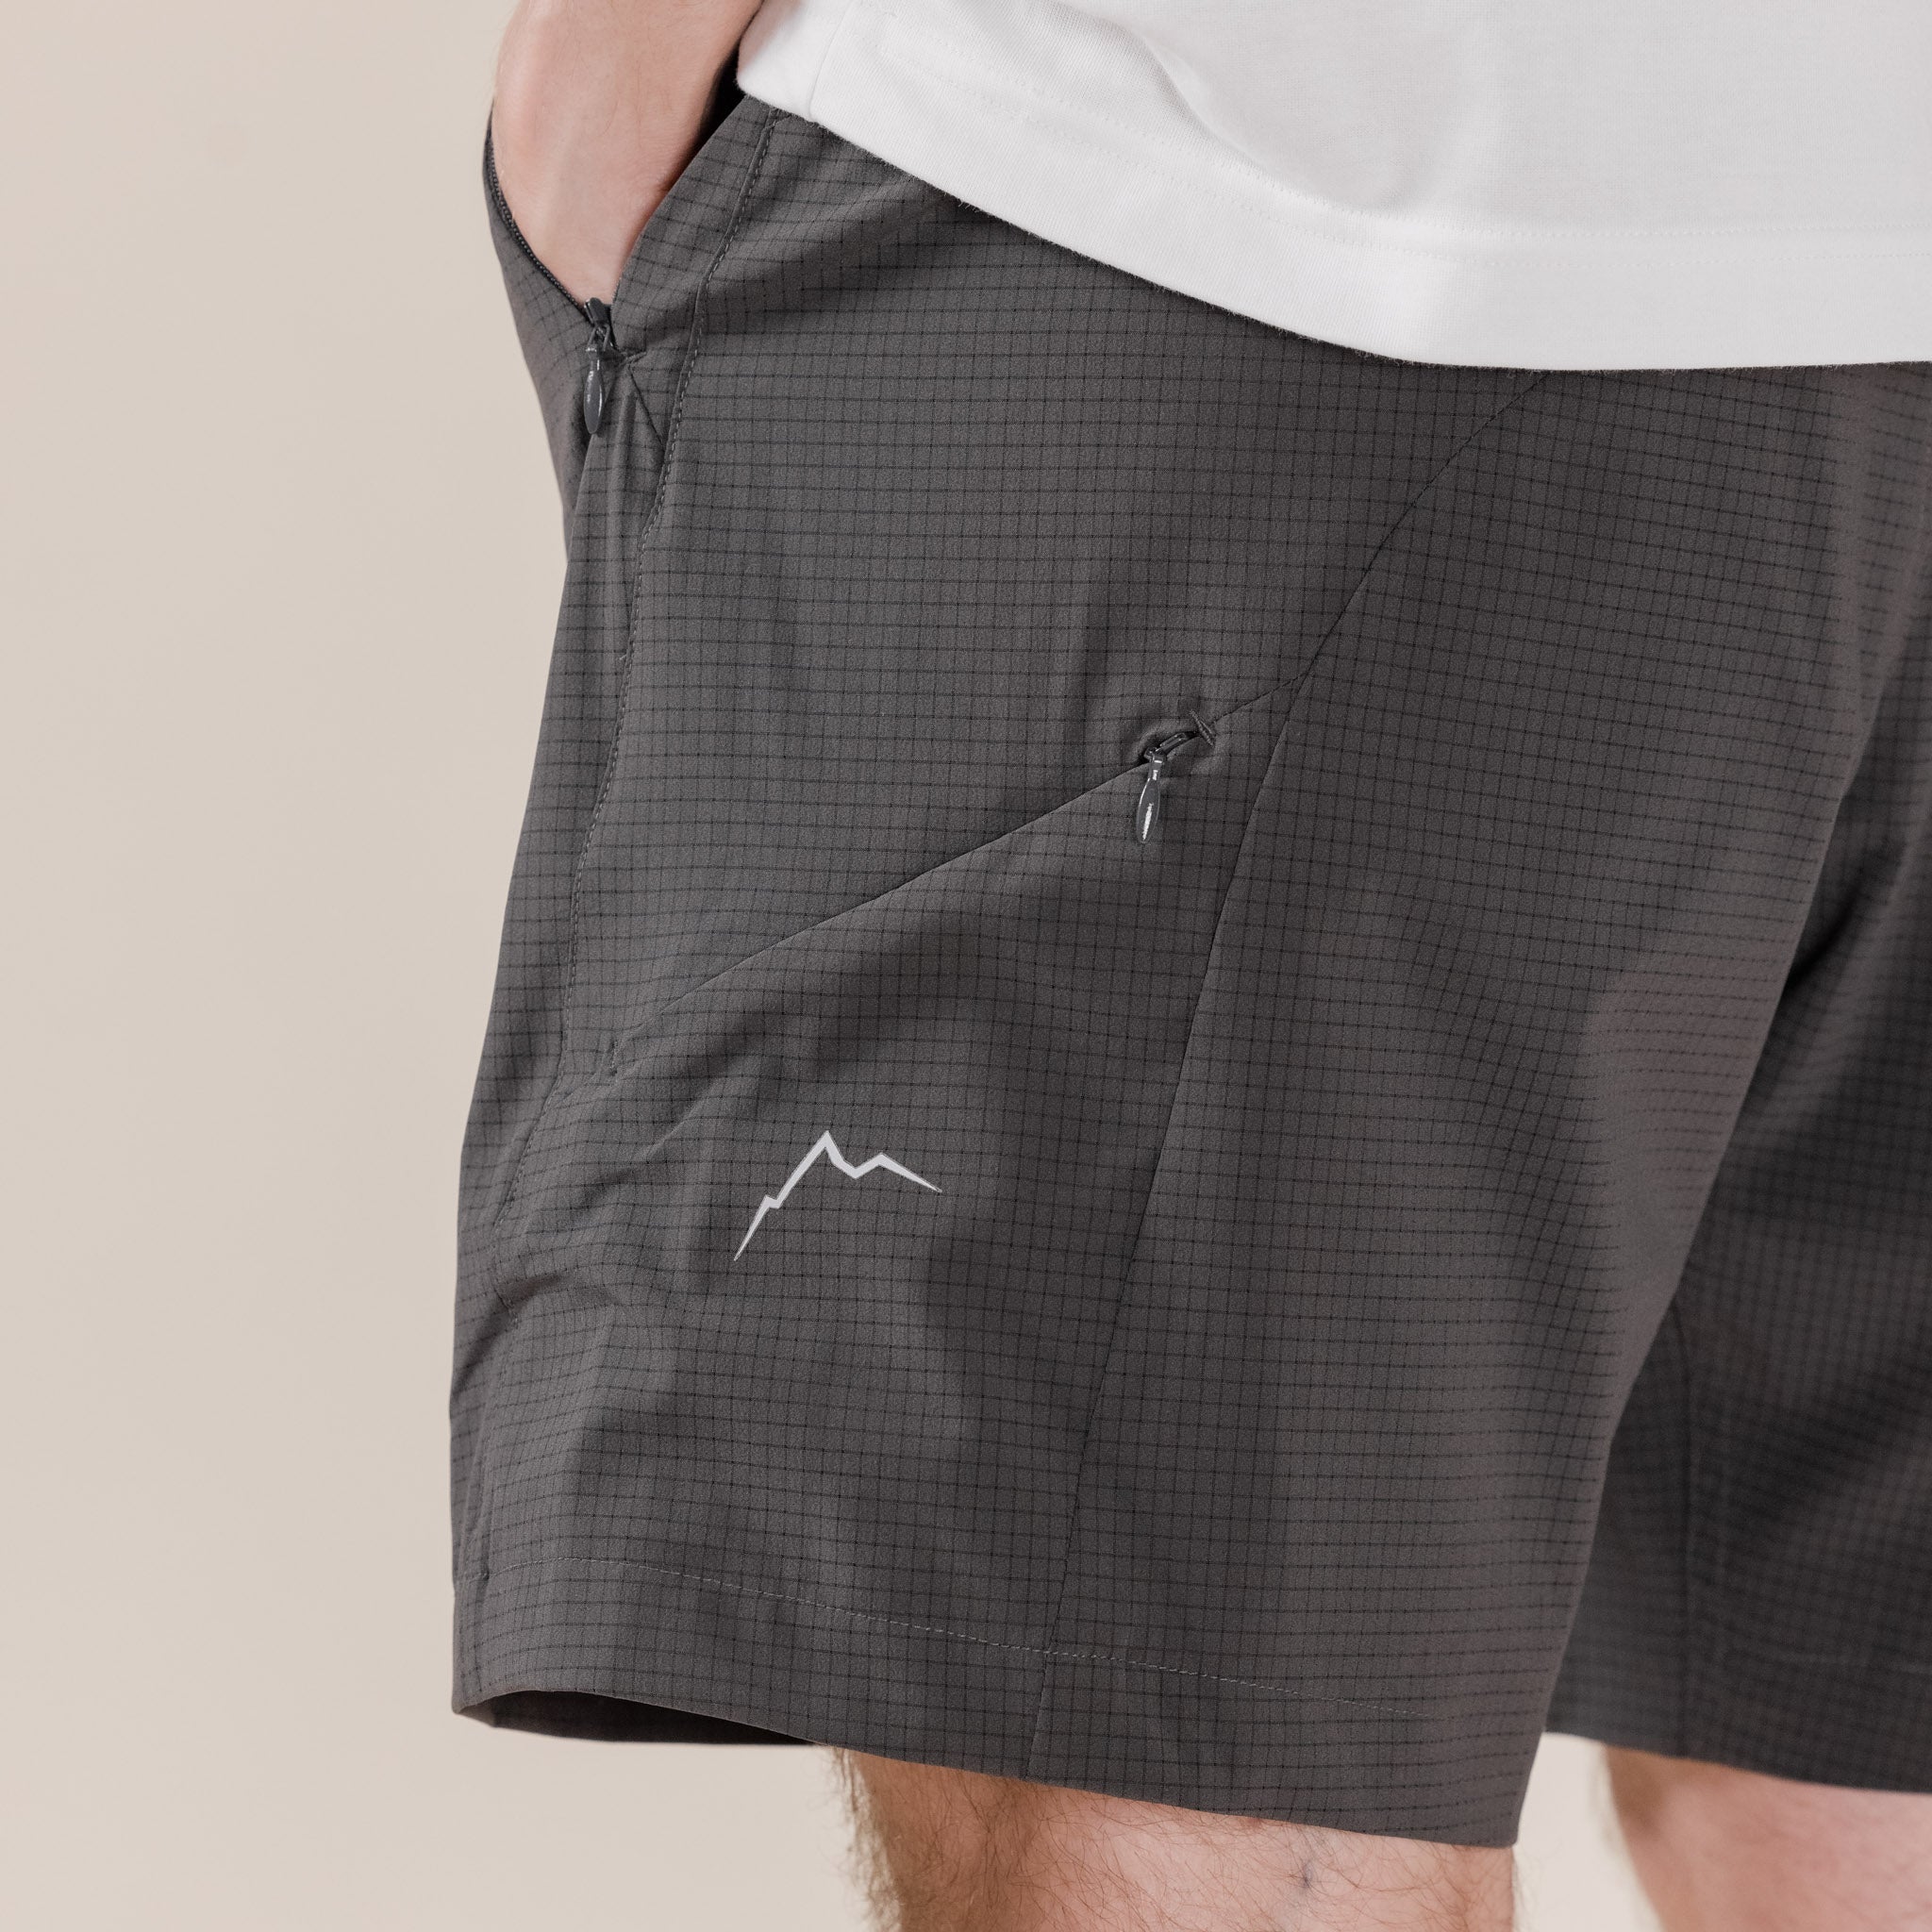 CAYL "Climb As You Love" - Flow Shorts - Charcoal Grey UK USA Stockist Best Price